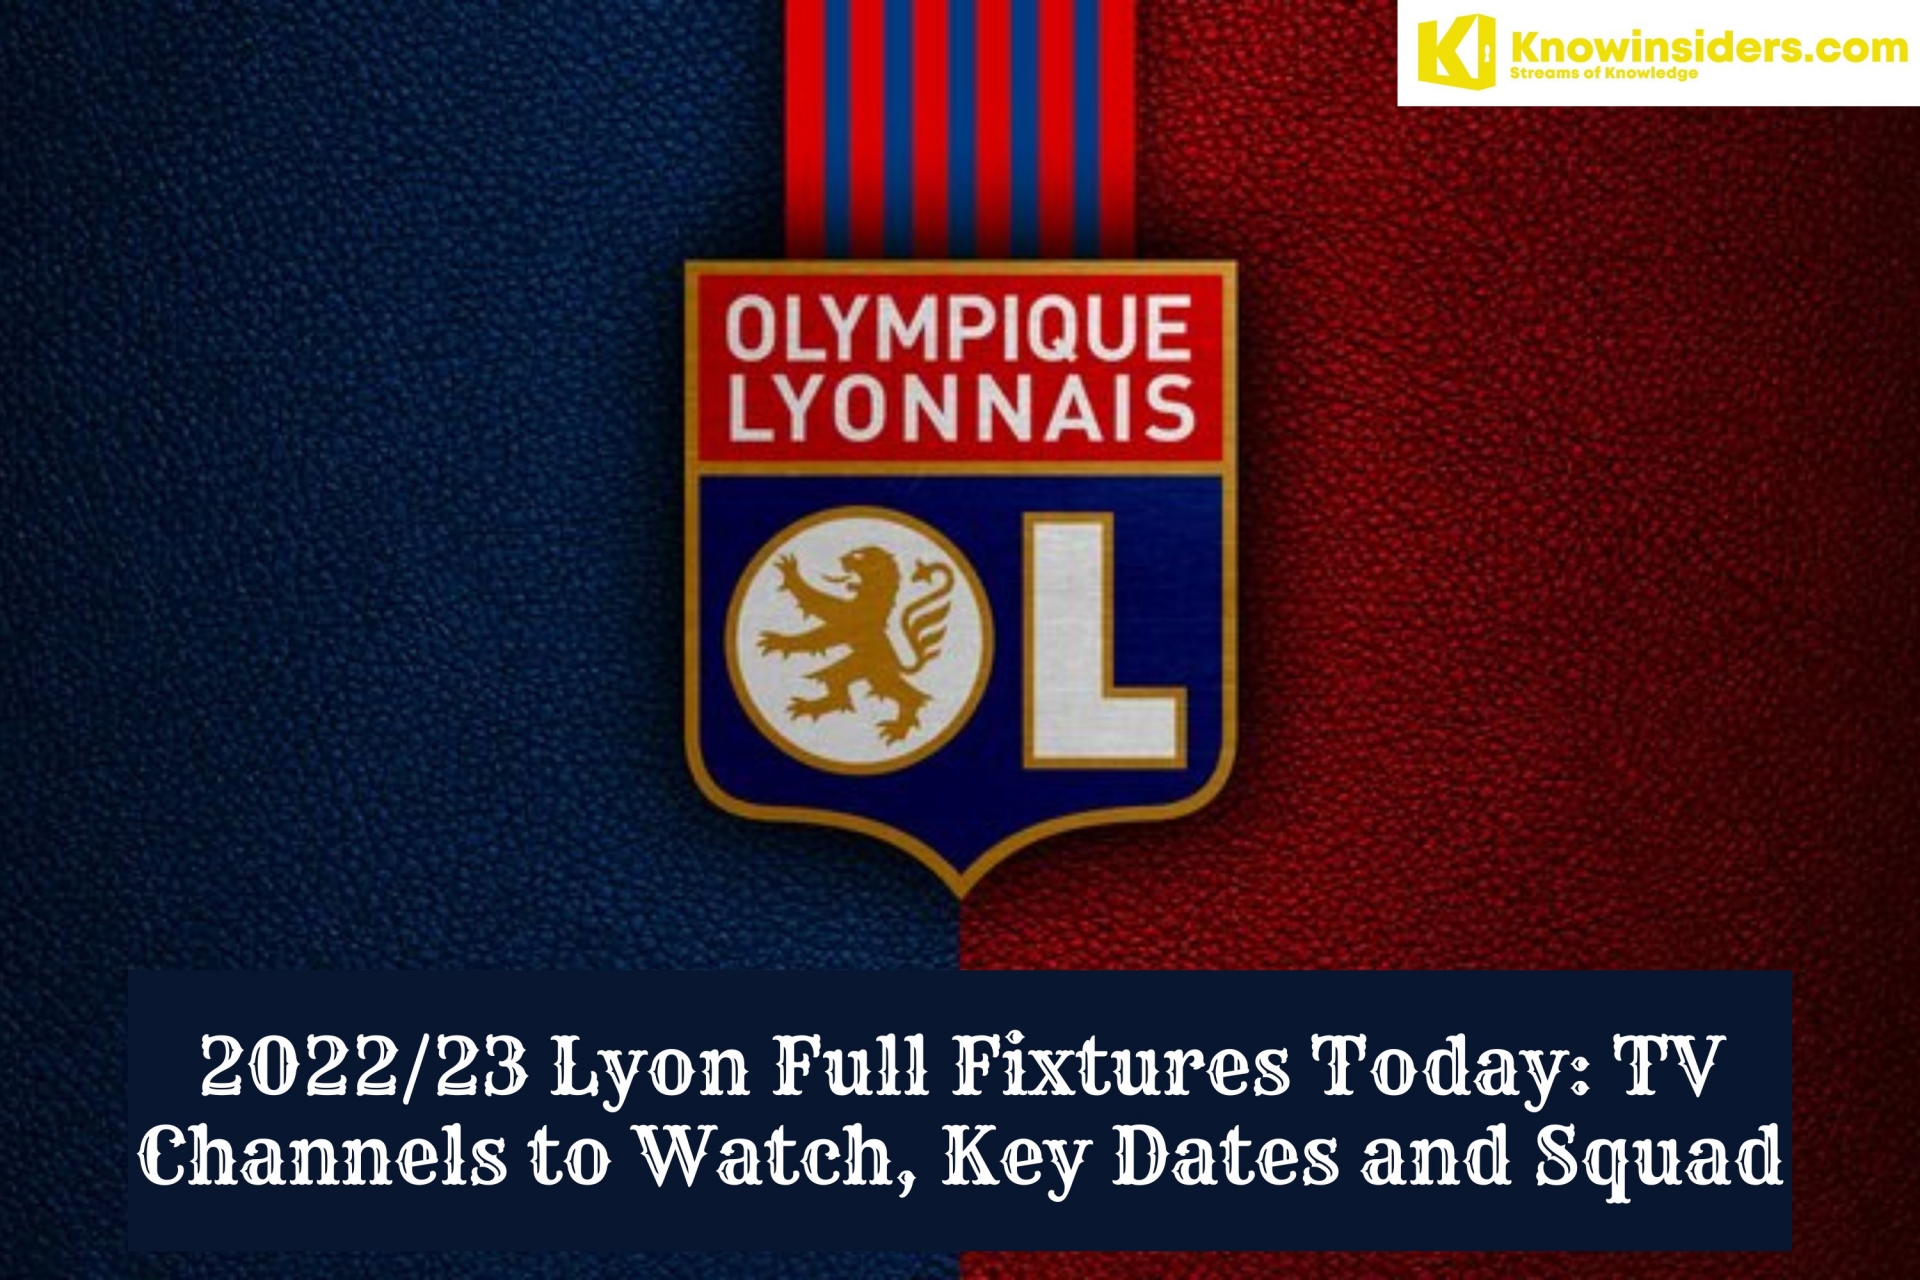 2022/23 Lyon Full Fixtures Today: TV Channels to Watch, Key Dates and Squad